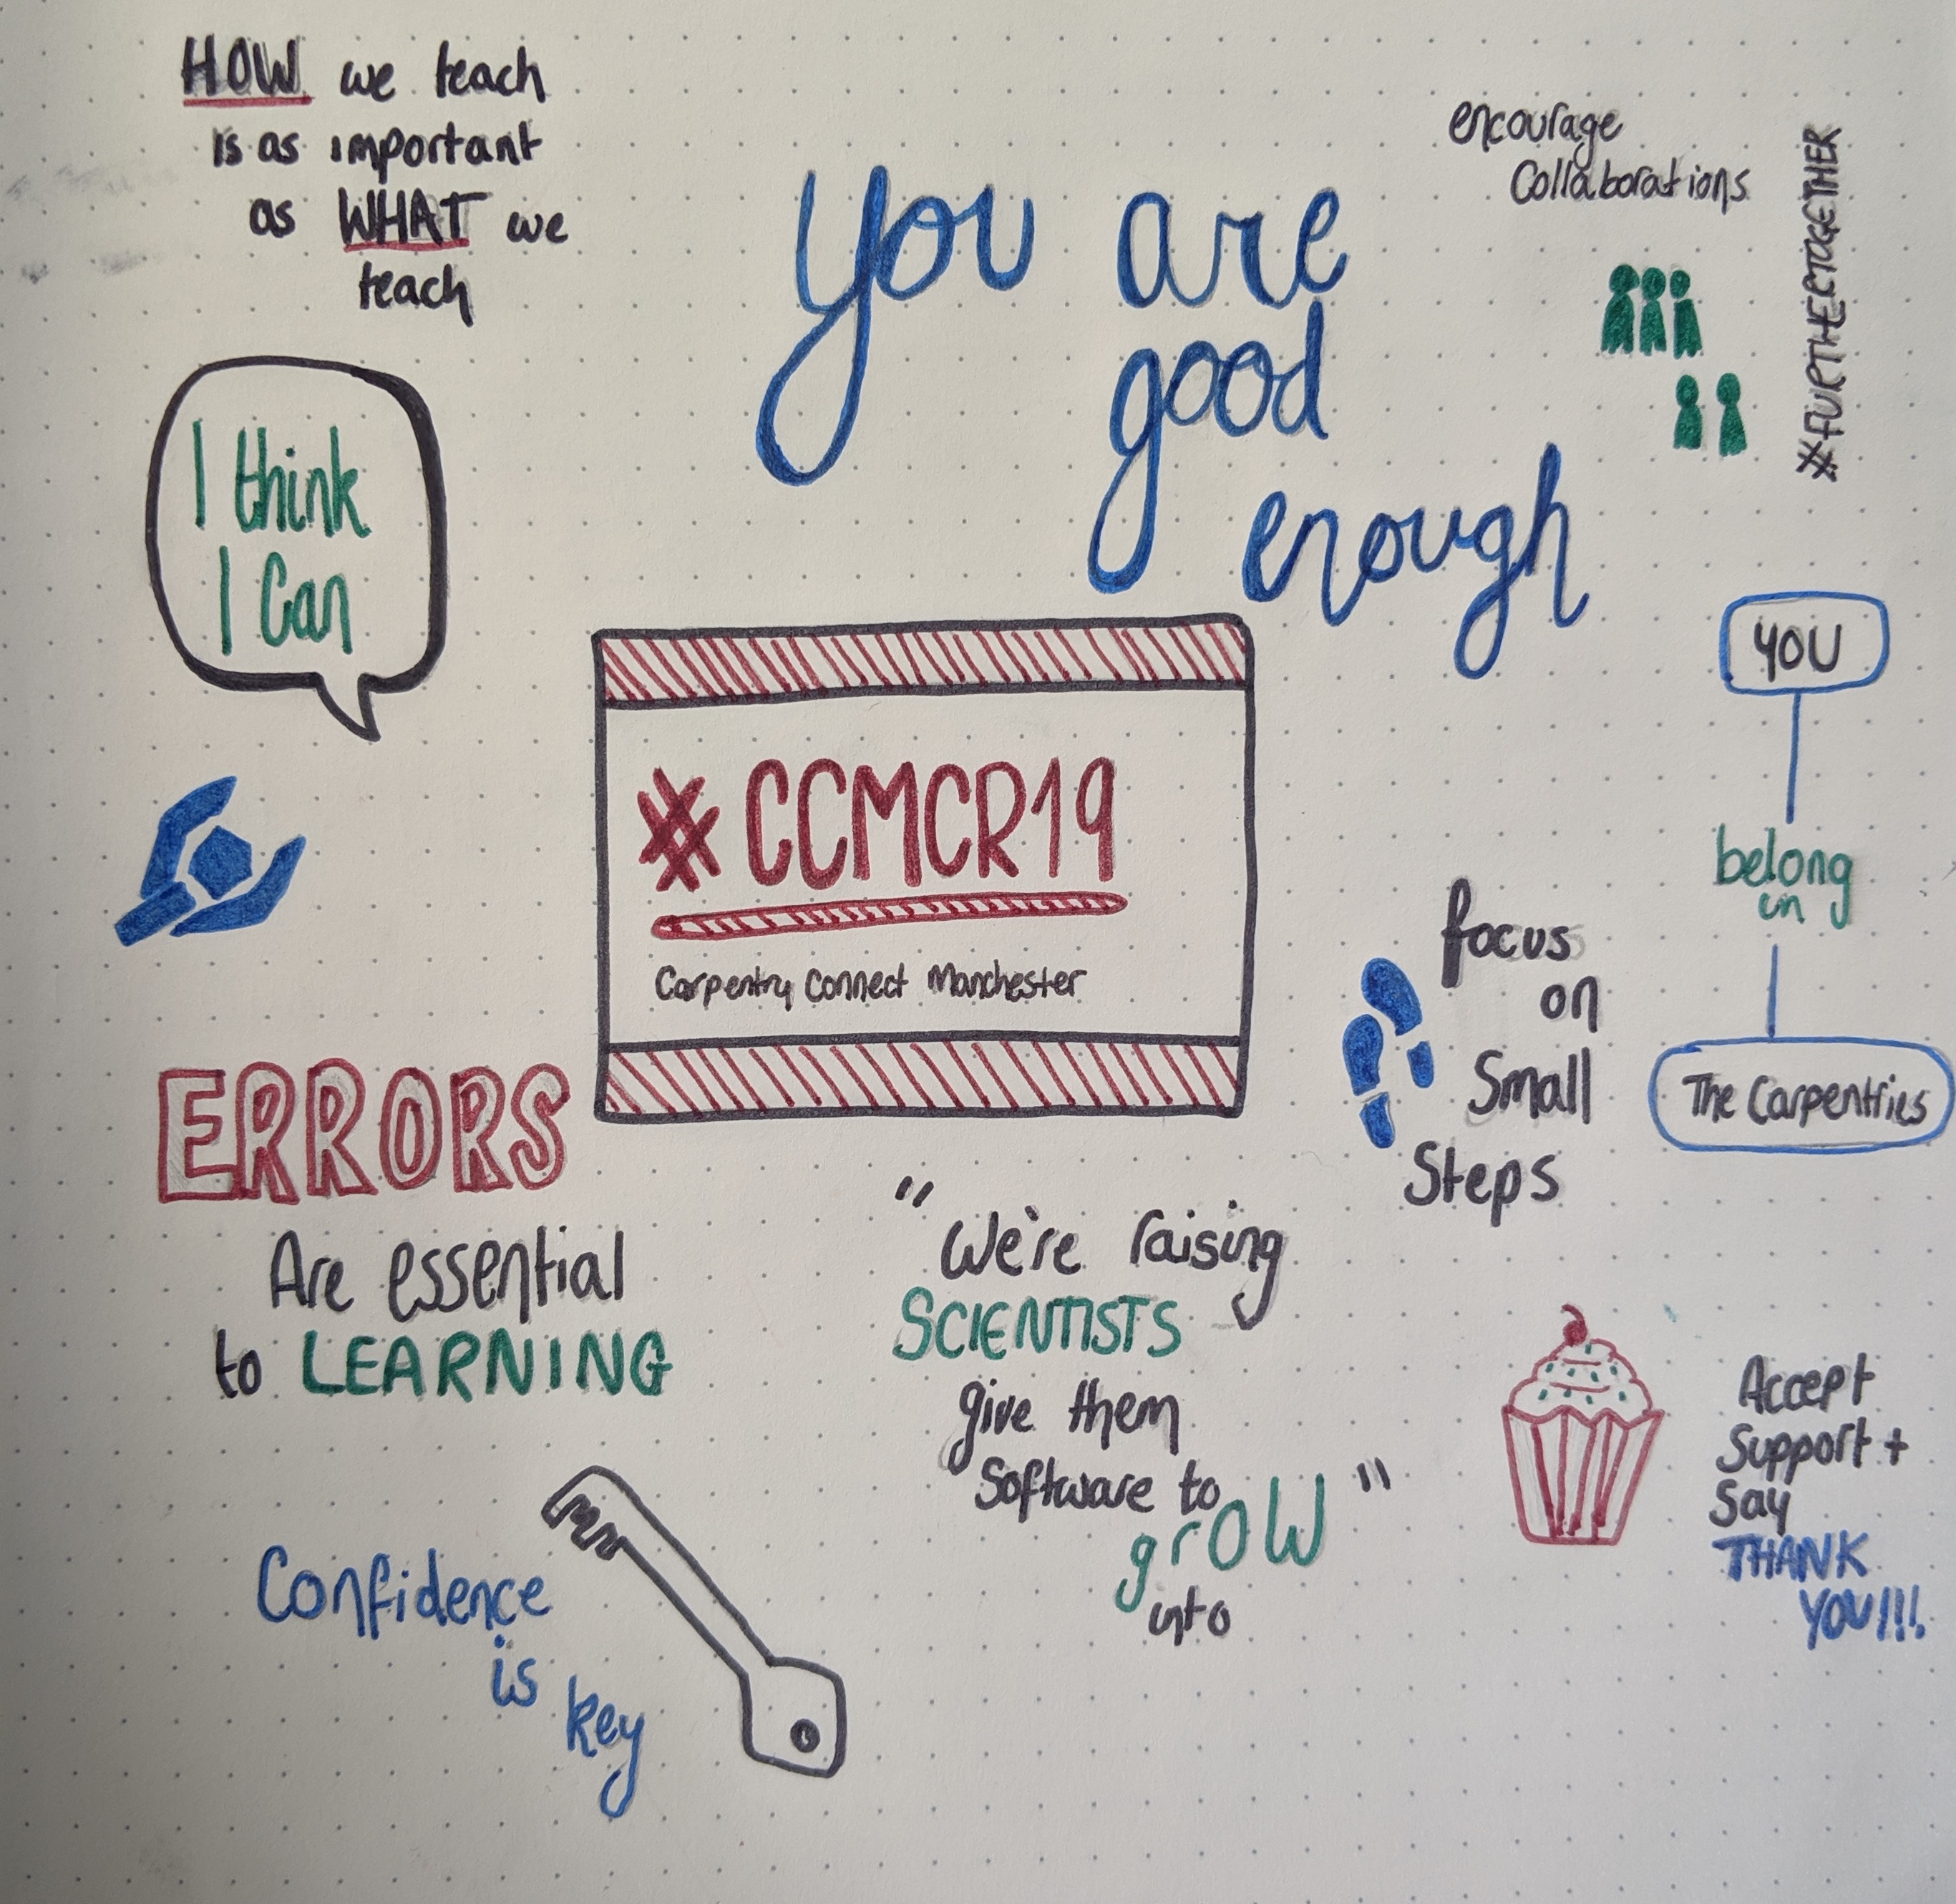 Sketchnotes from carpentry connect